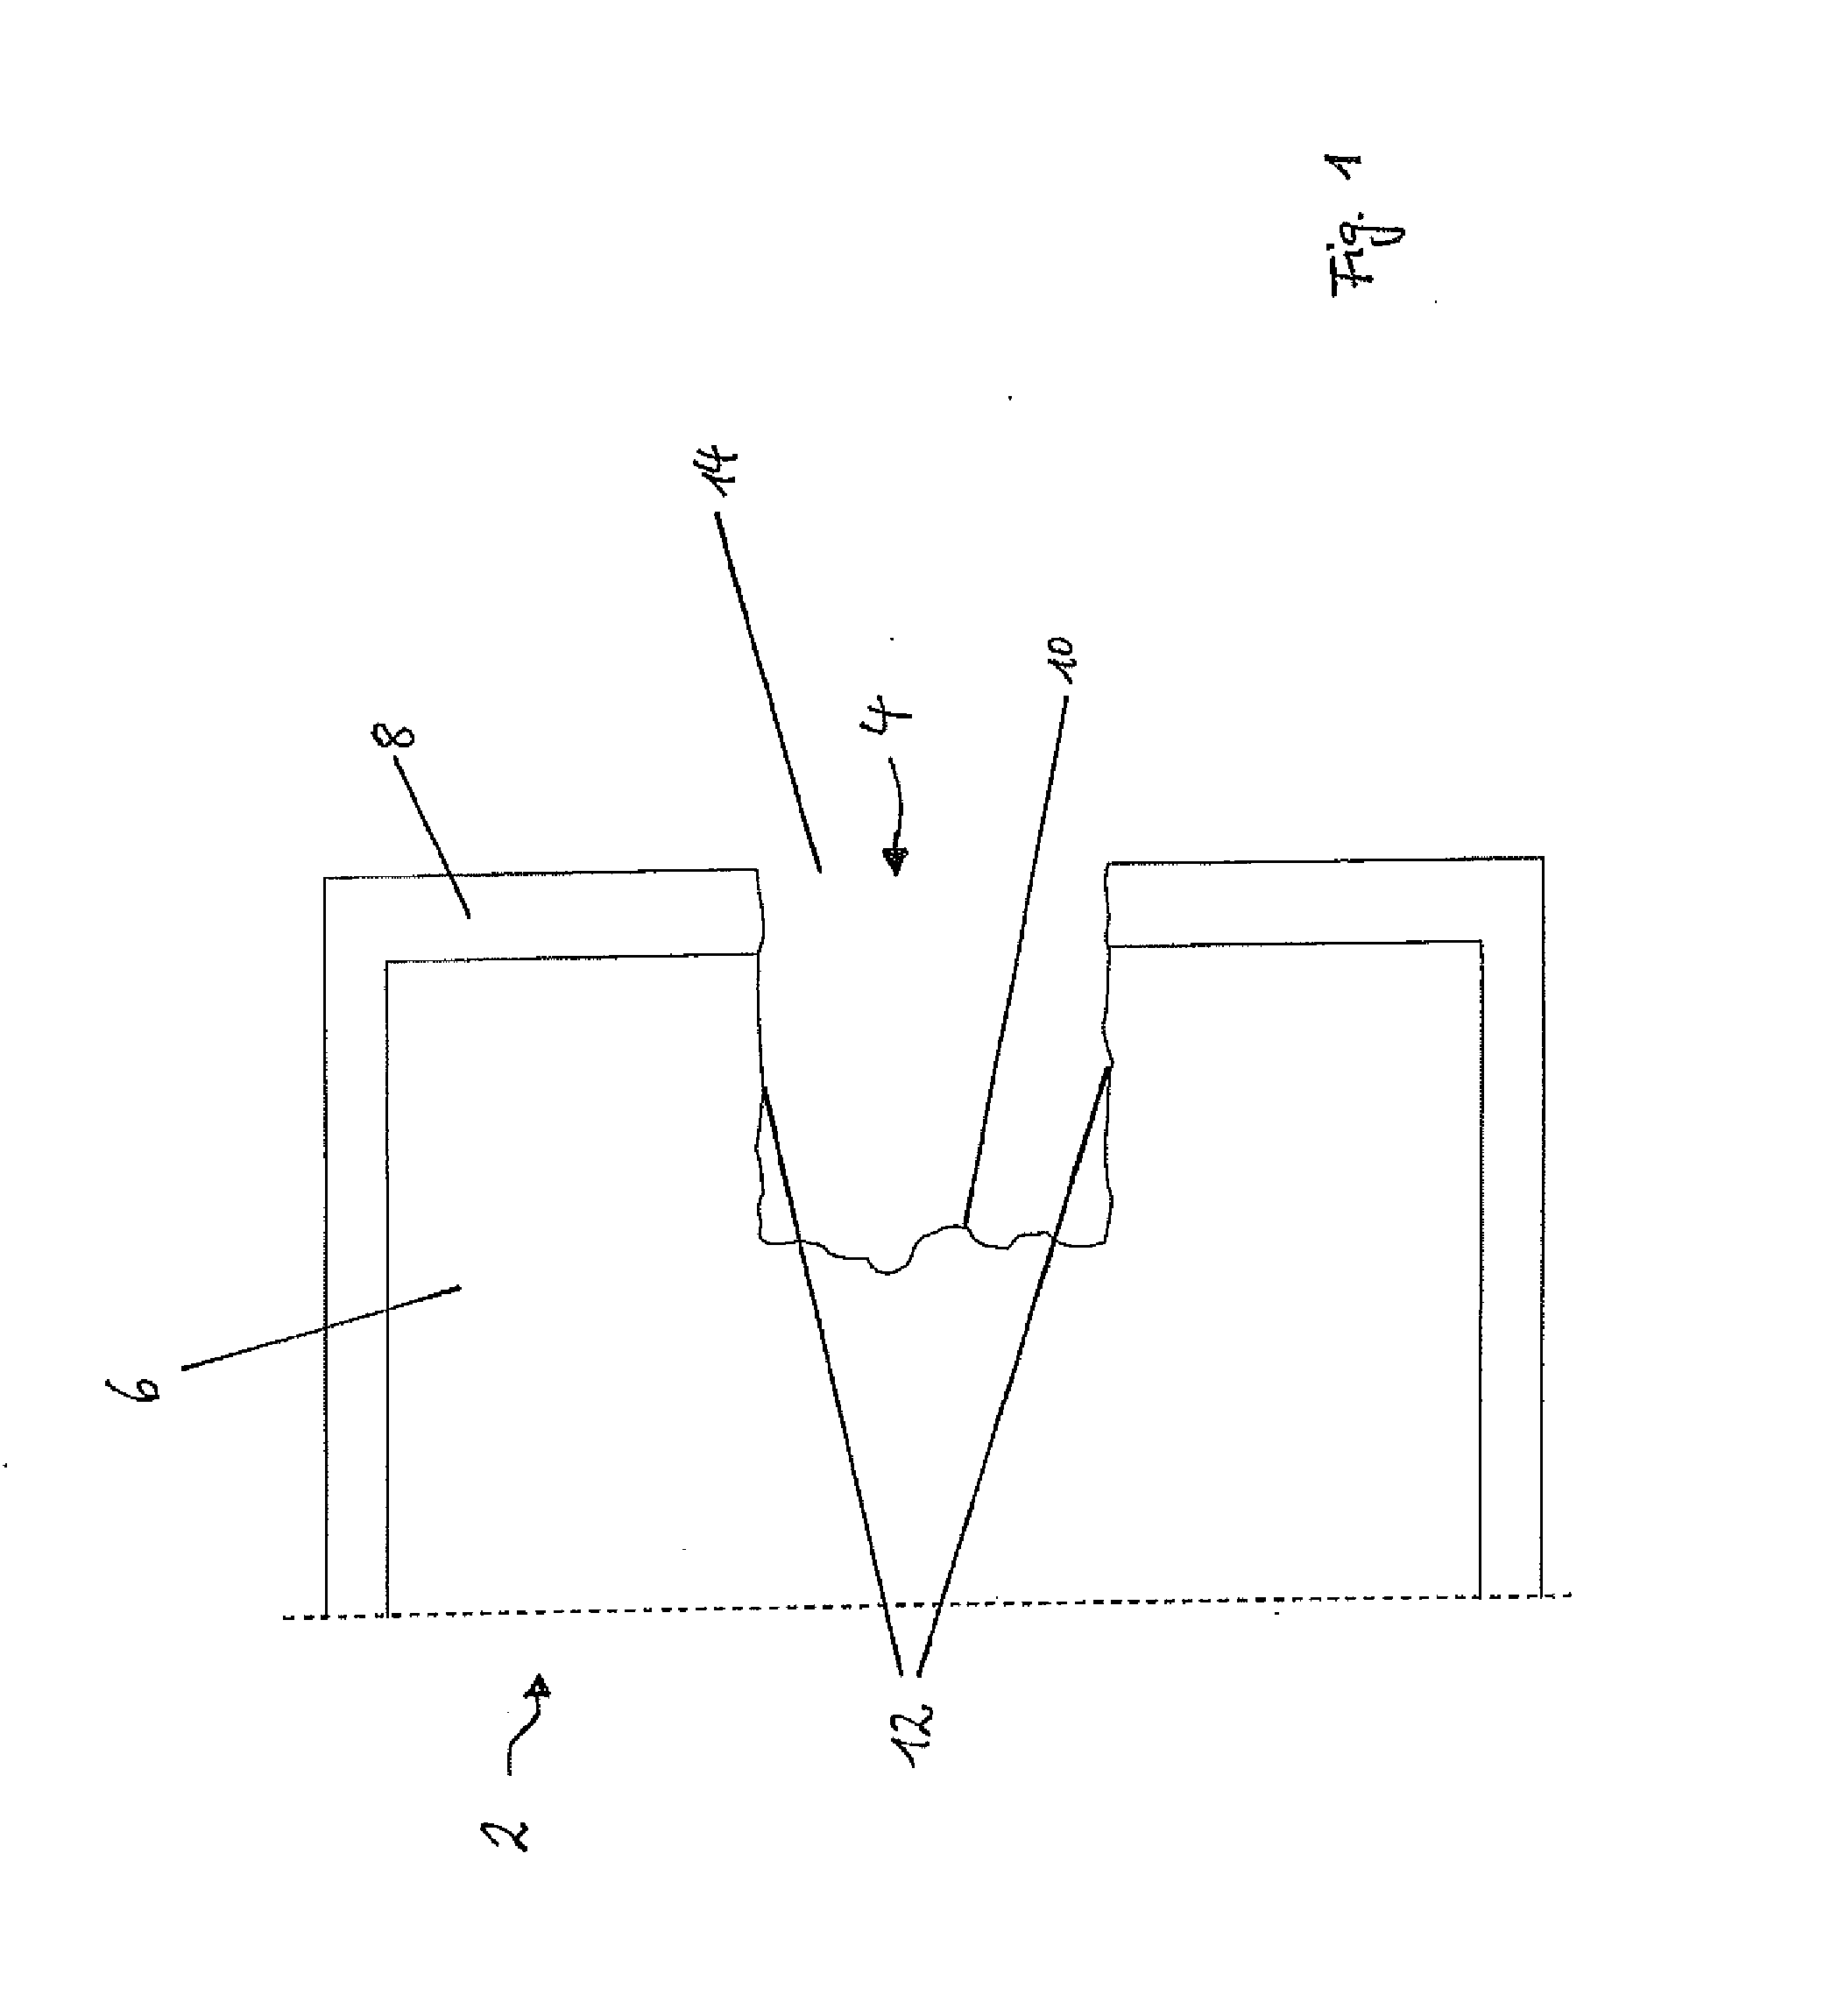 Method for Sealing of Replacement Windows